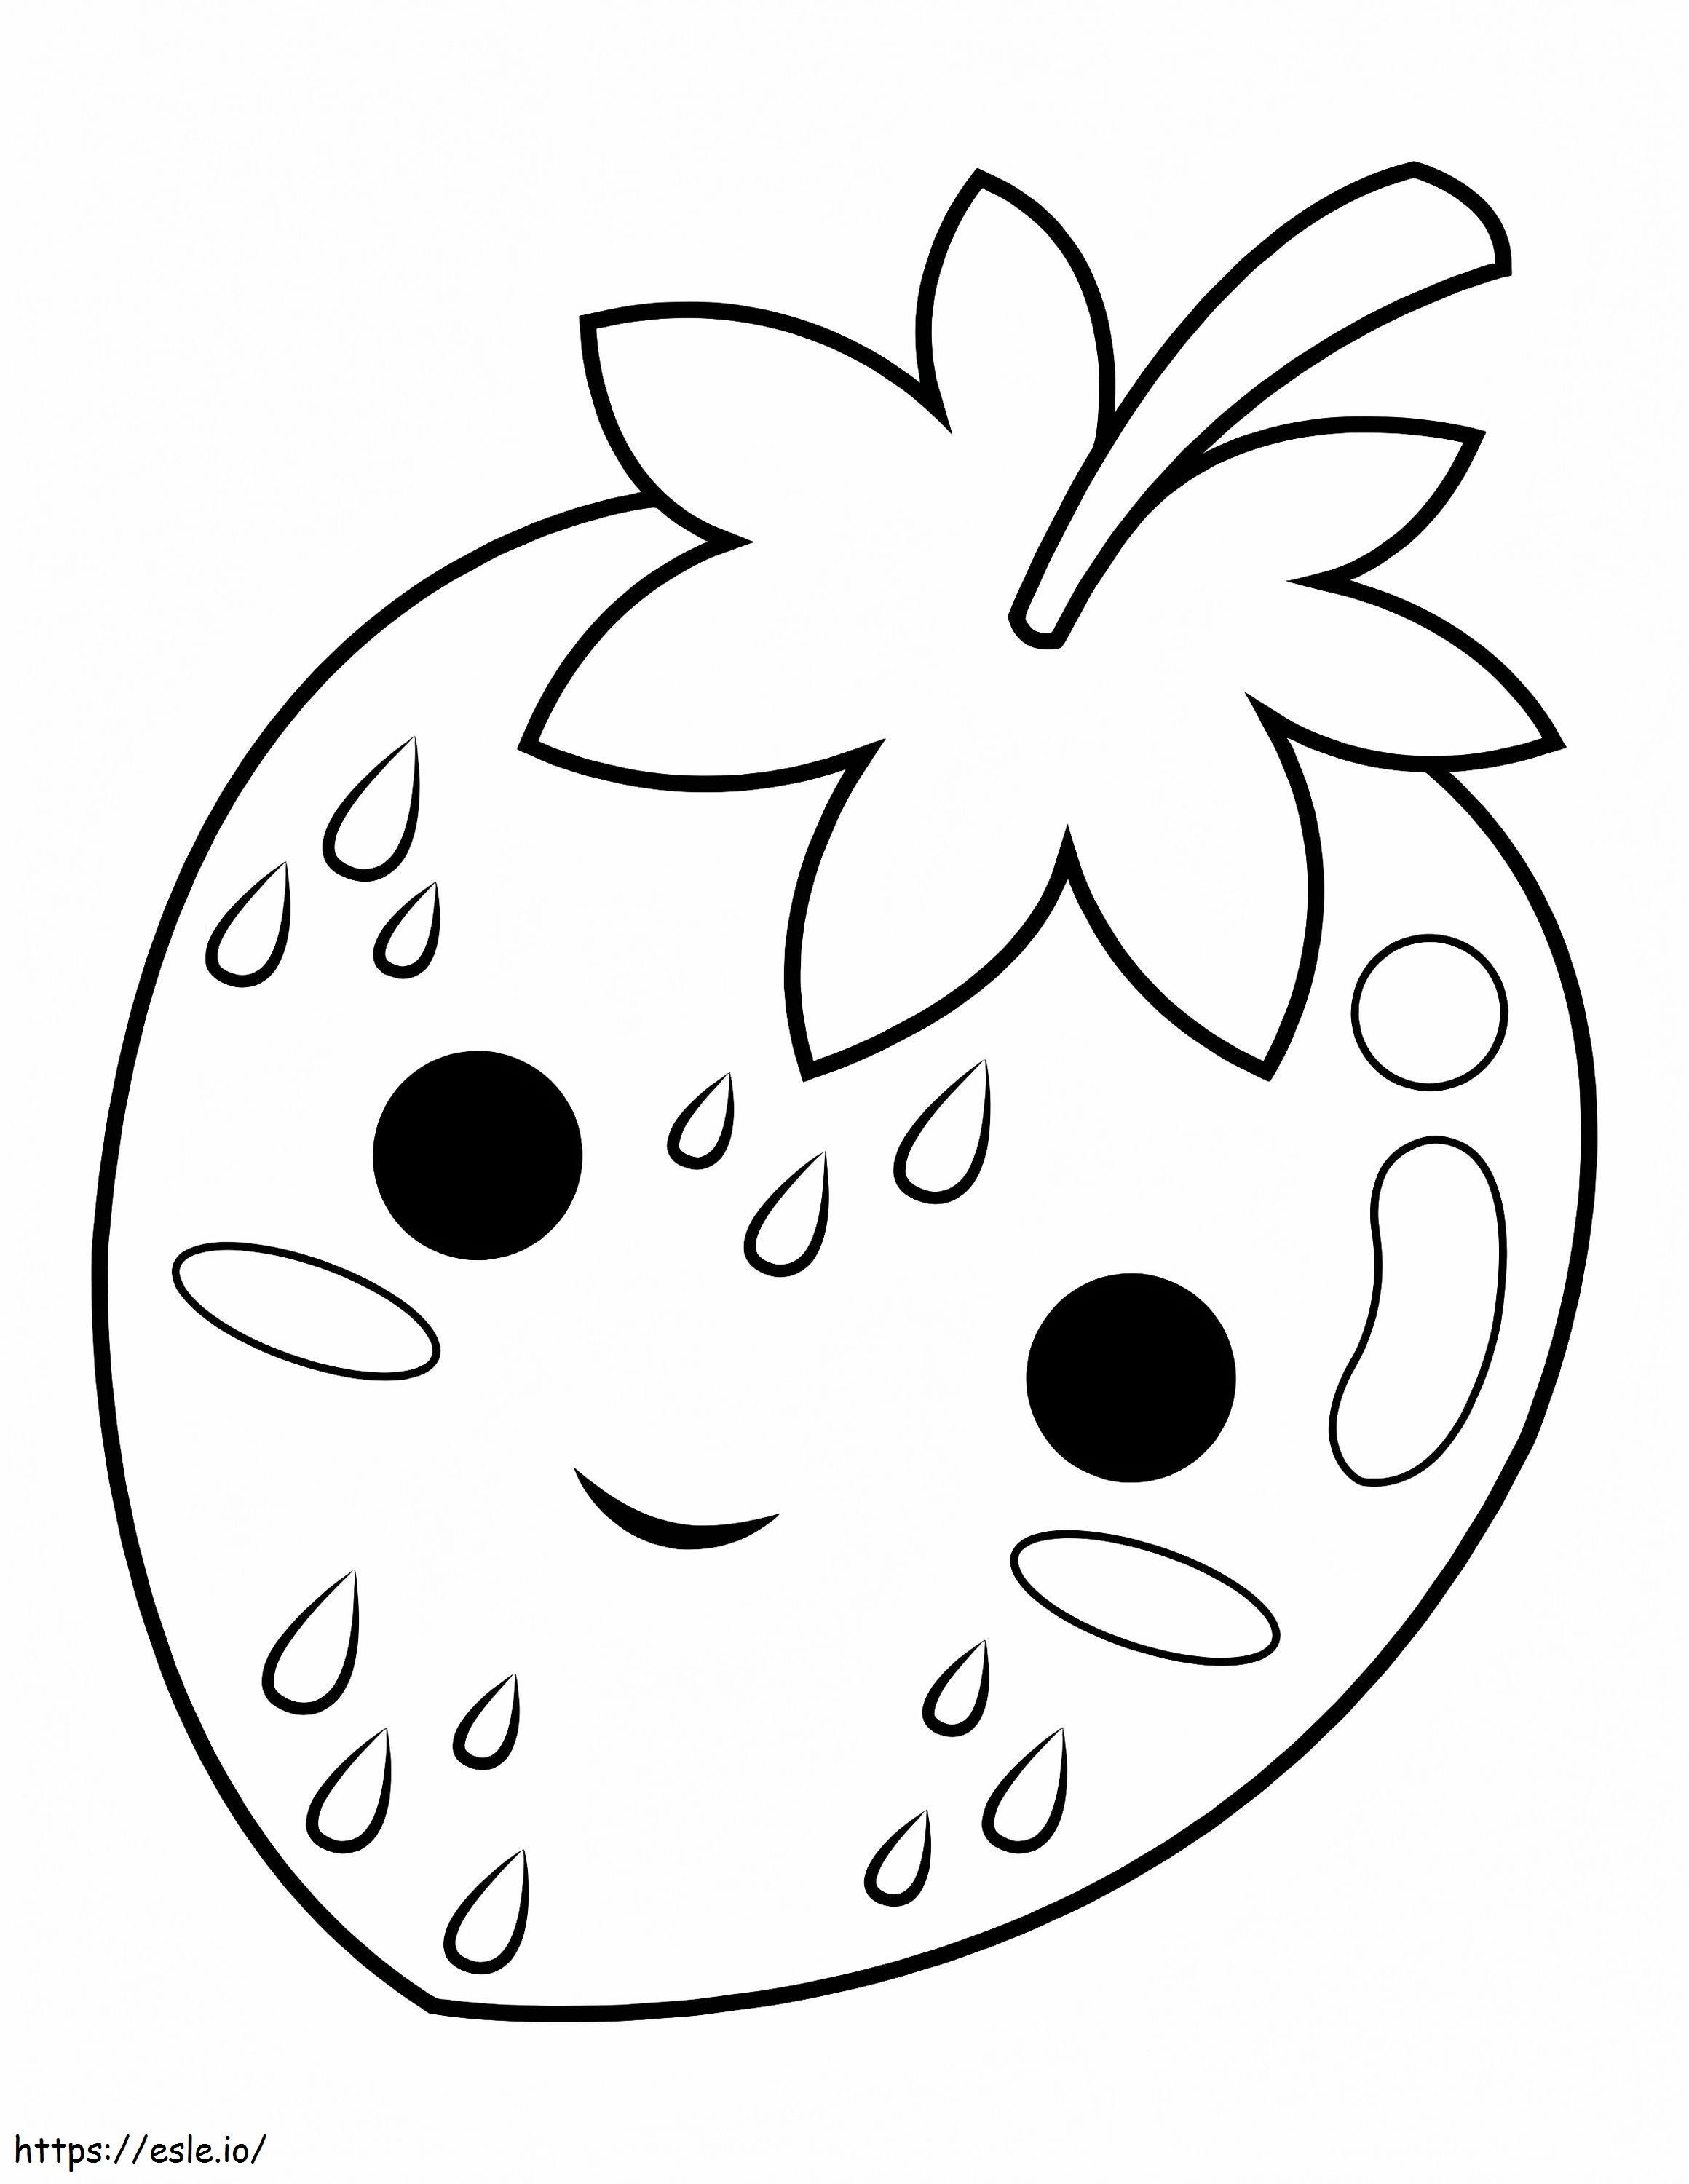 Smiling Strawberry coloring page